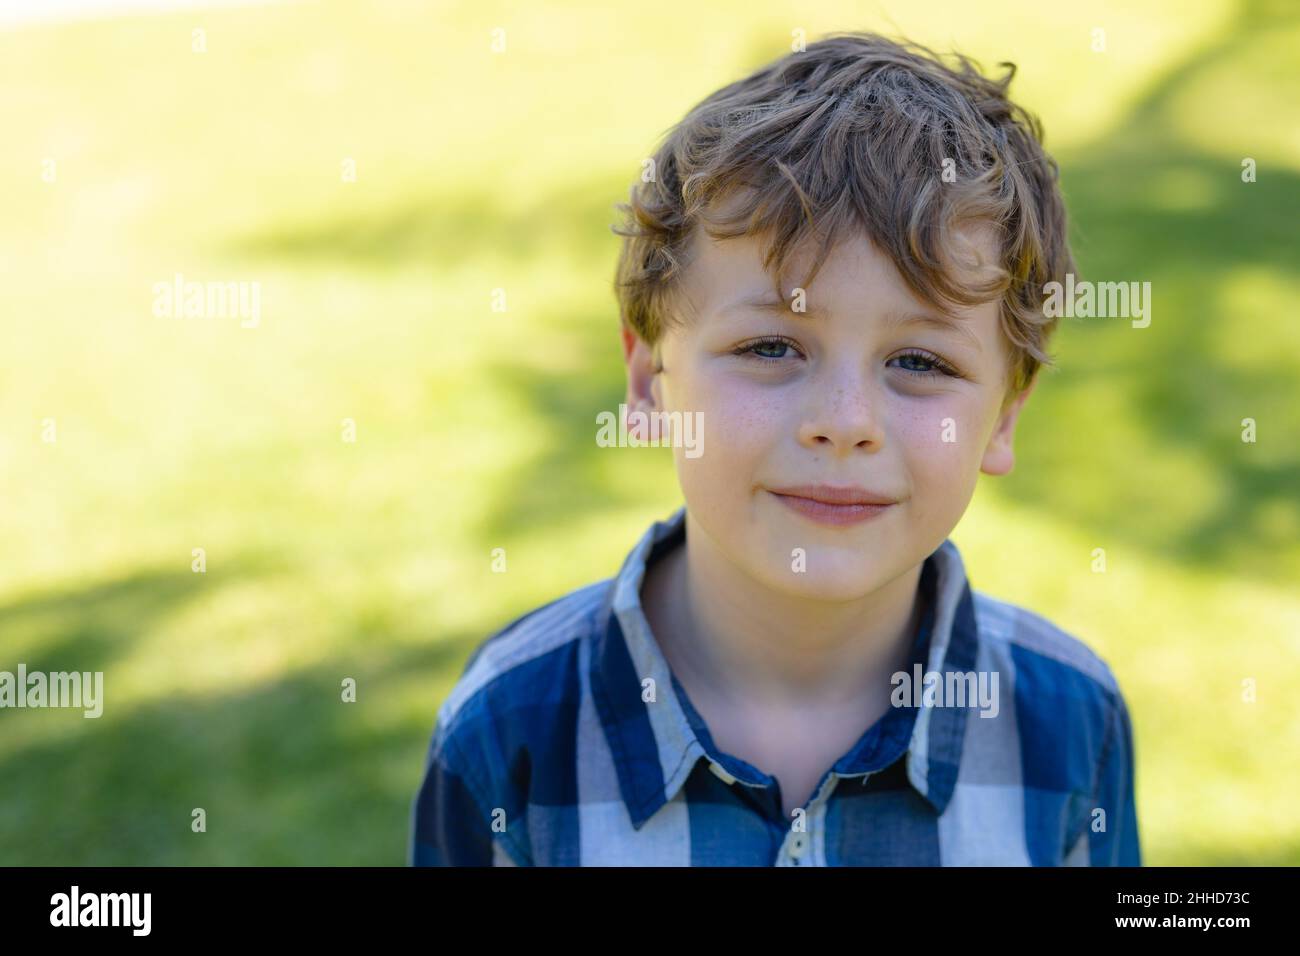 Portrait of caucasian boy smiling while standing in the garden Stock Photo